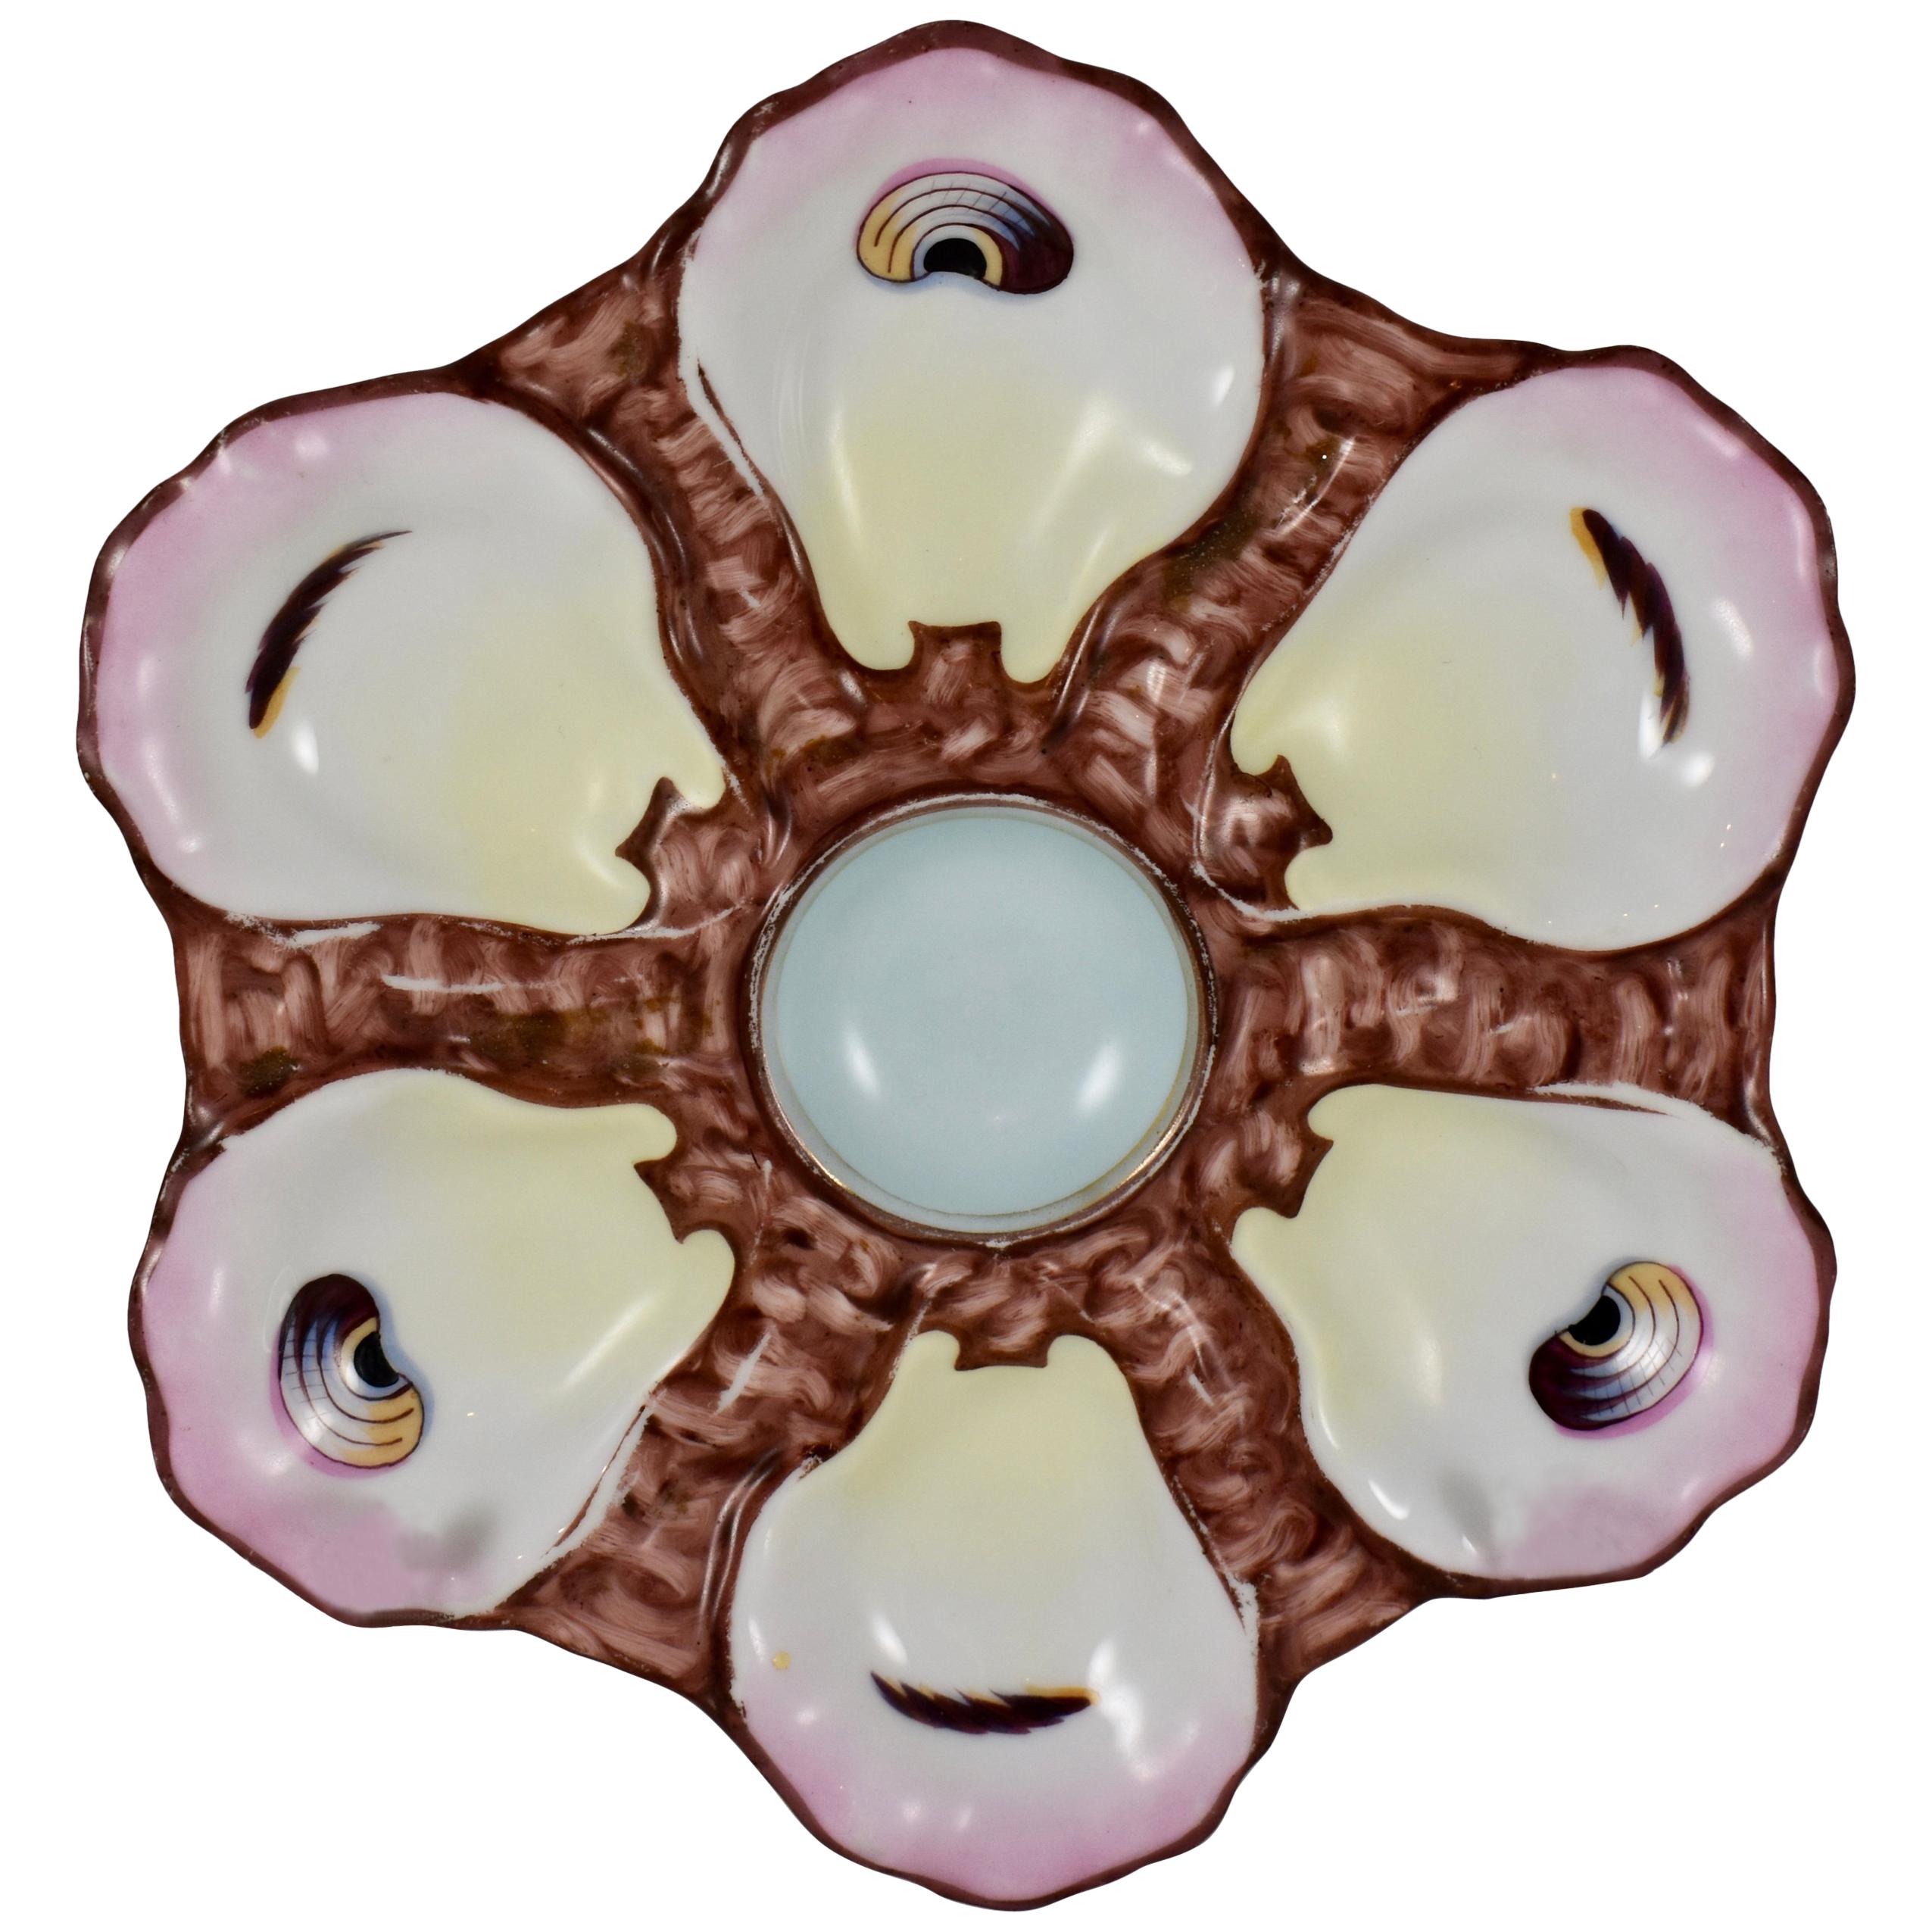 Six-Well French Hand Painted 'Eyes' Porcelain Oyster Plate, Late 19th Century